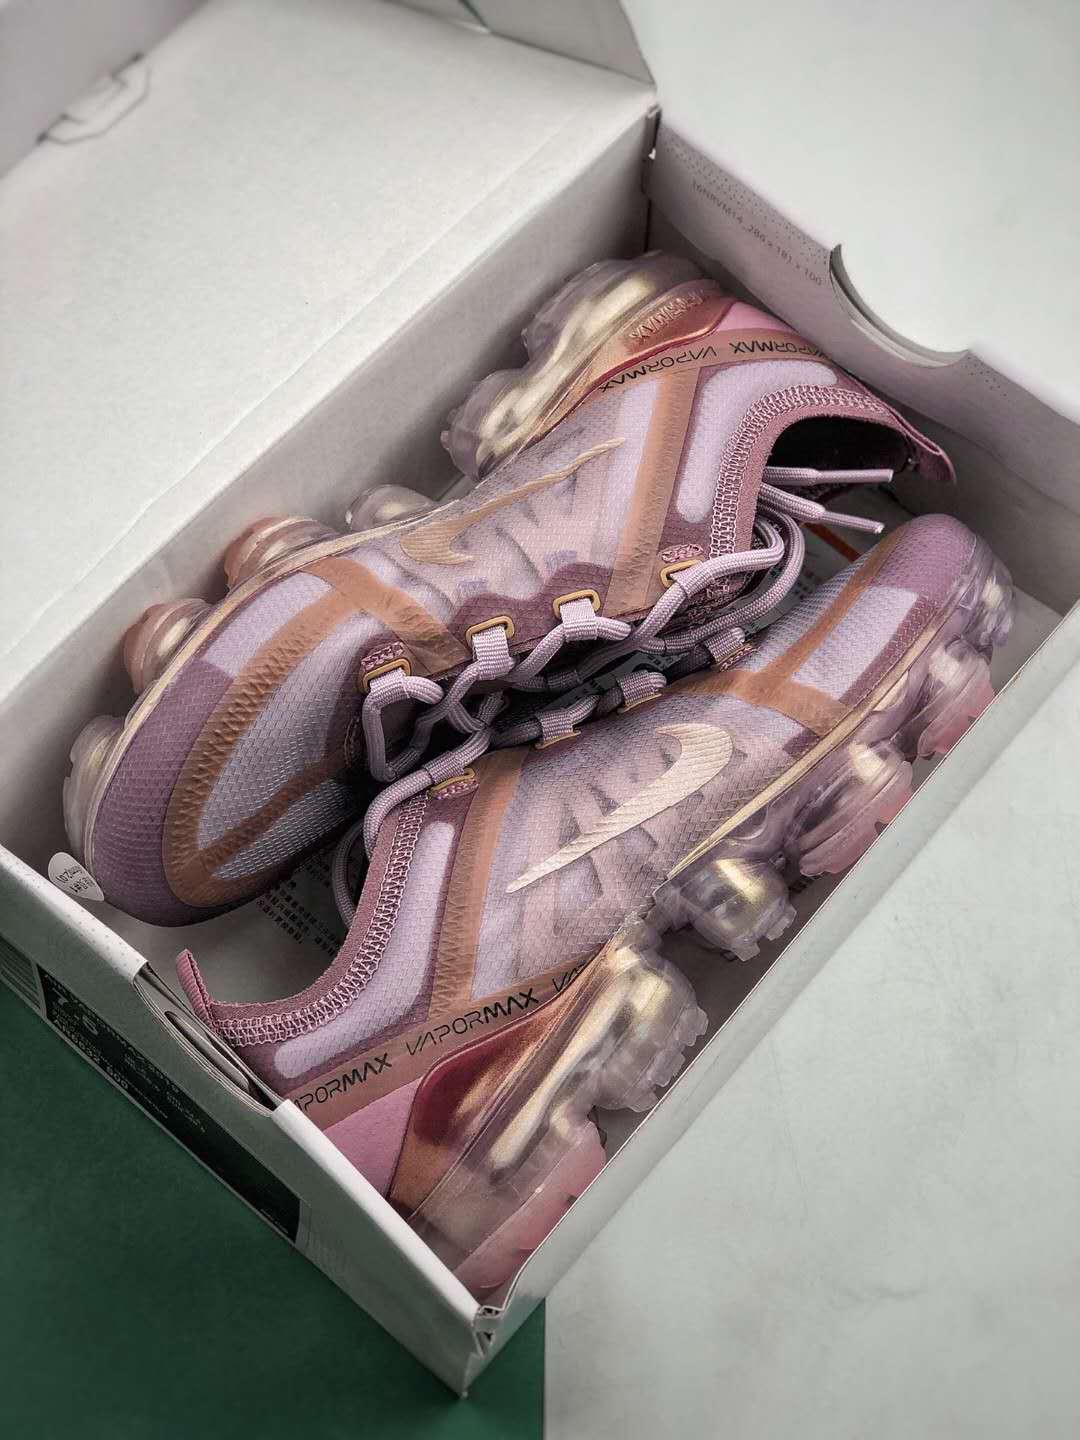 Nike Air VaporMax 2019 'Soft Pink' AR6632-500 - Lightweight and Stylish Footwear for Women | Limited Edition